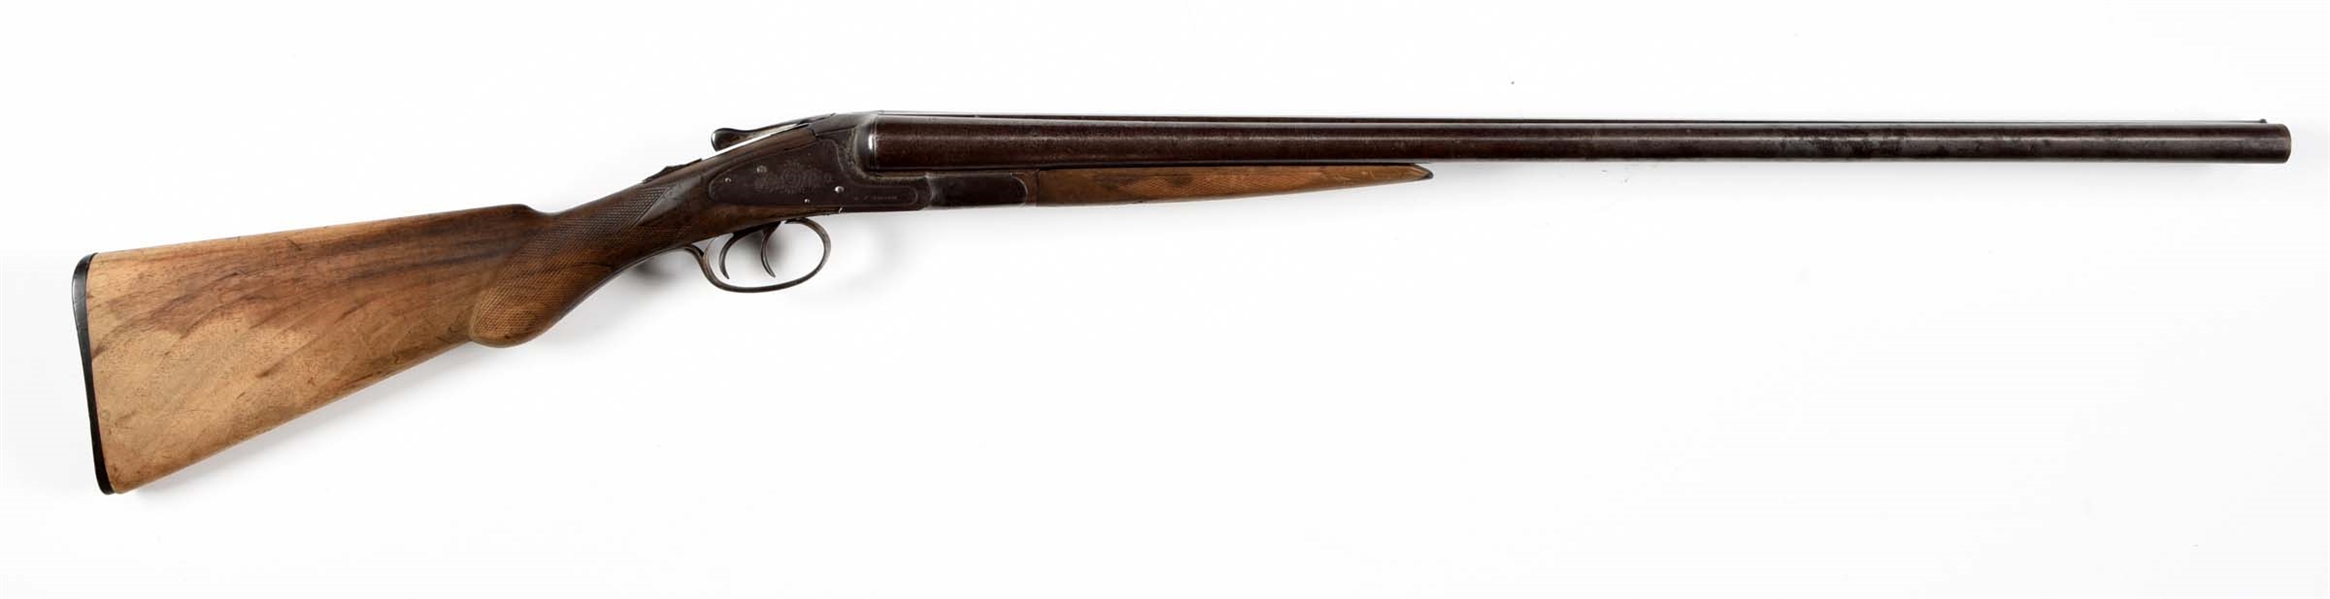 (C) LC SMITH NO. 1 SIDE BY SIDE SHOTGUN.